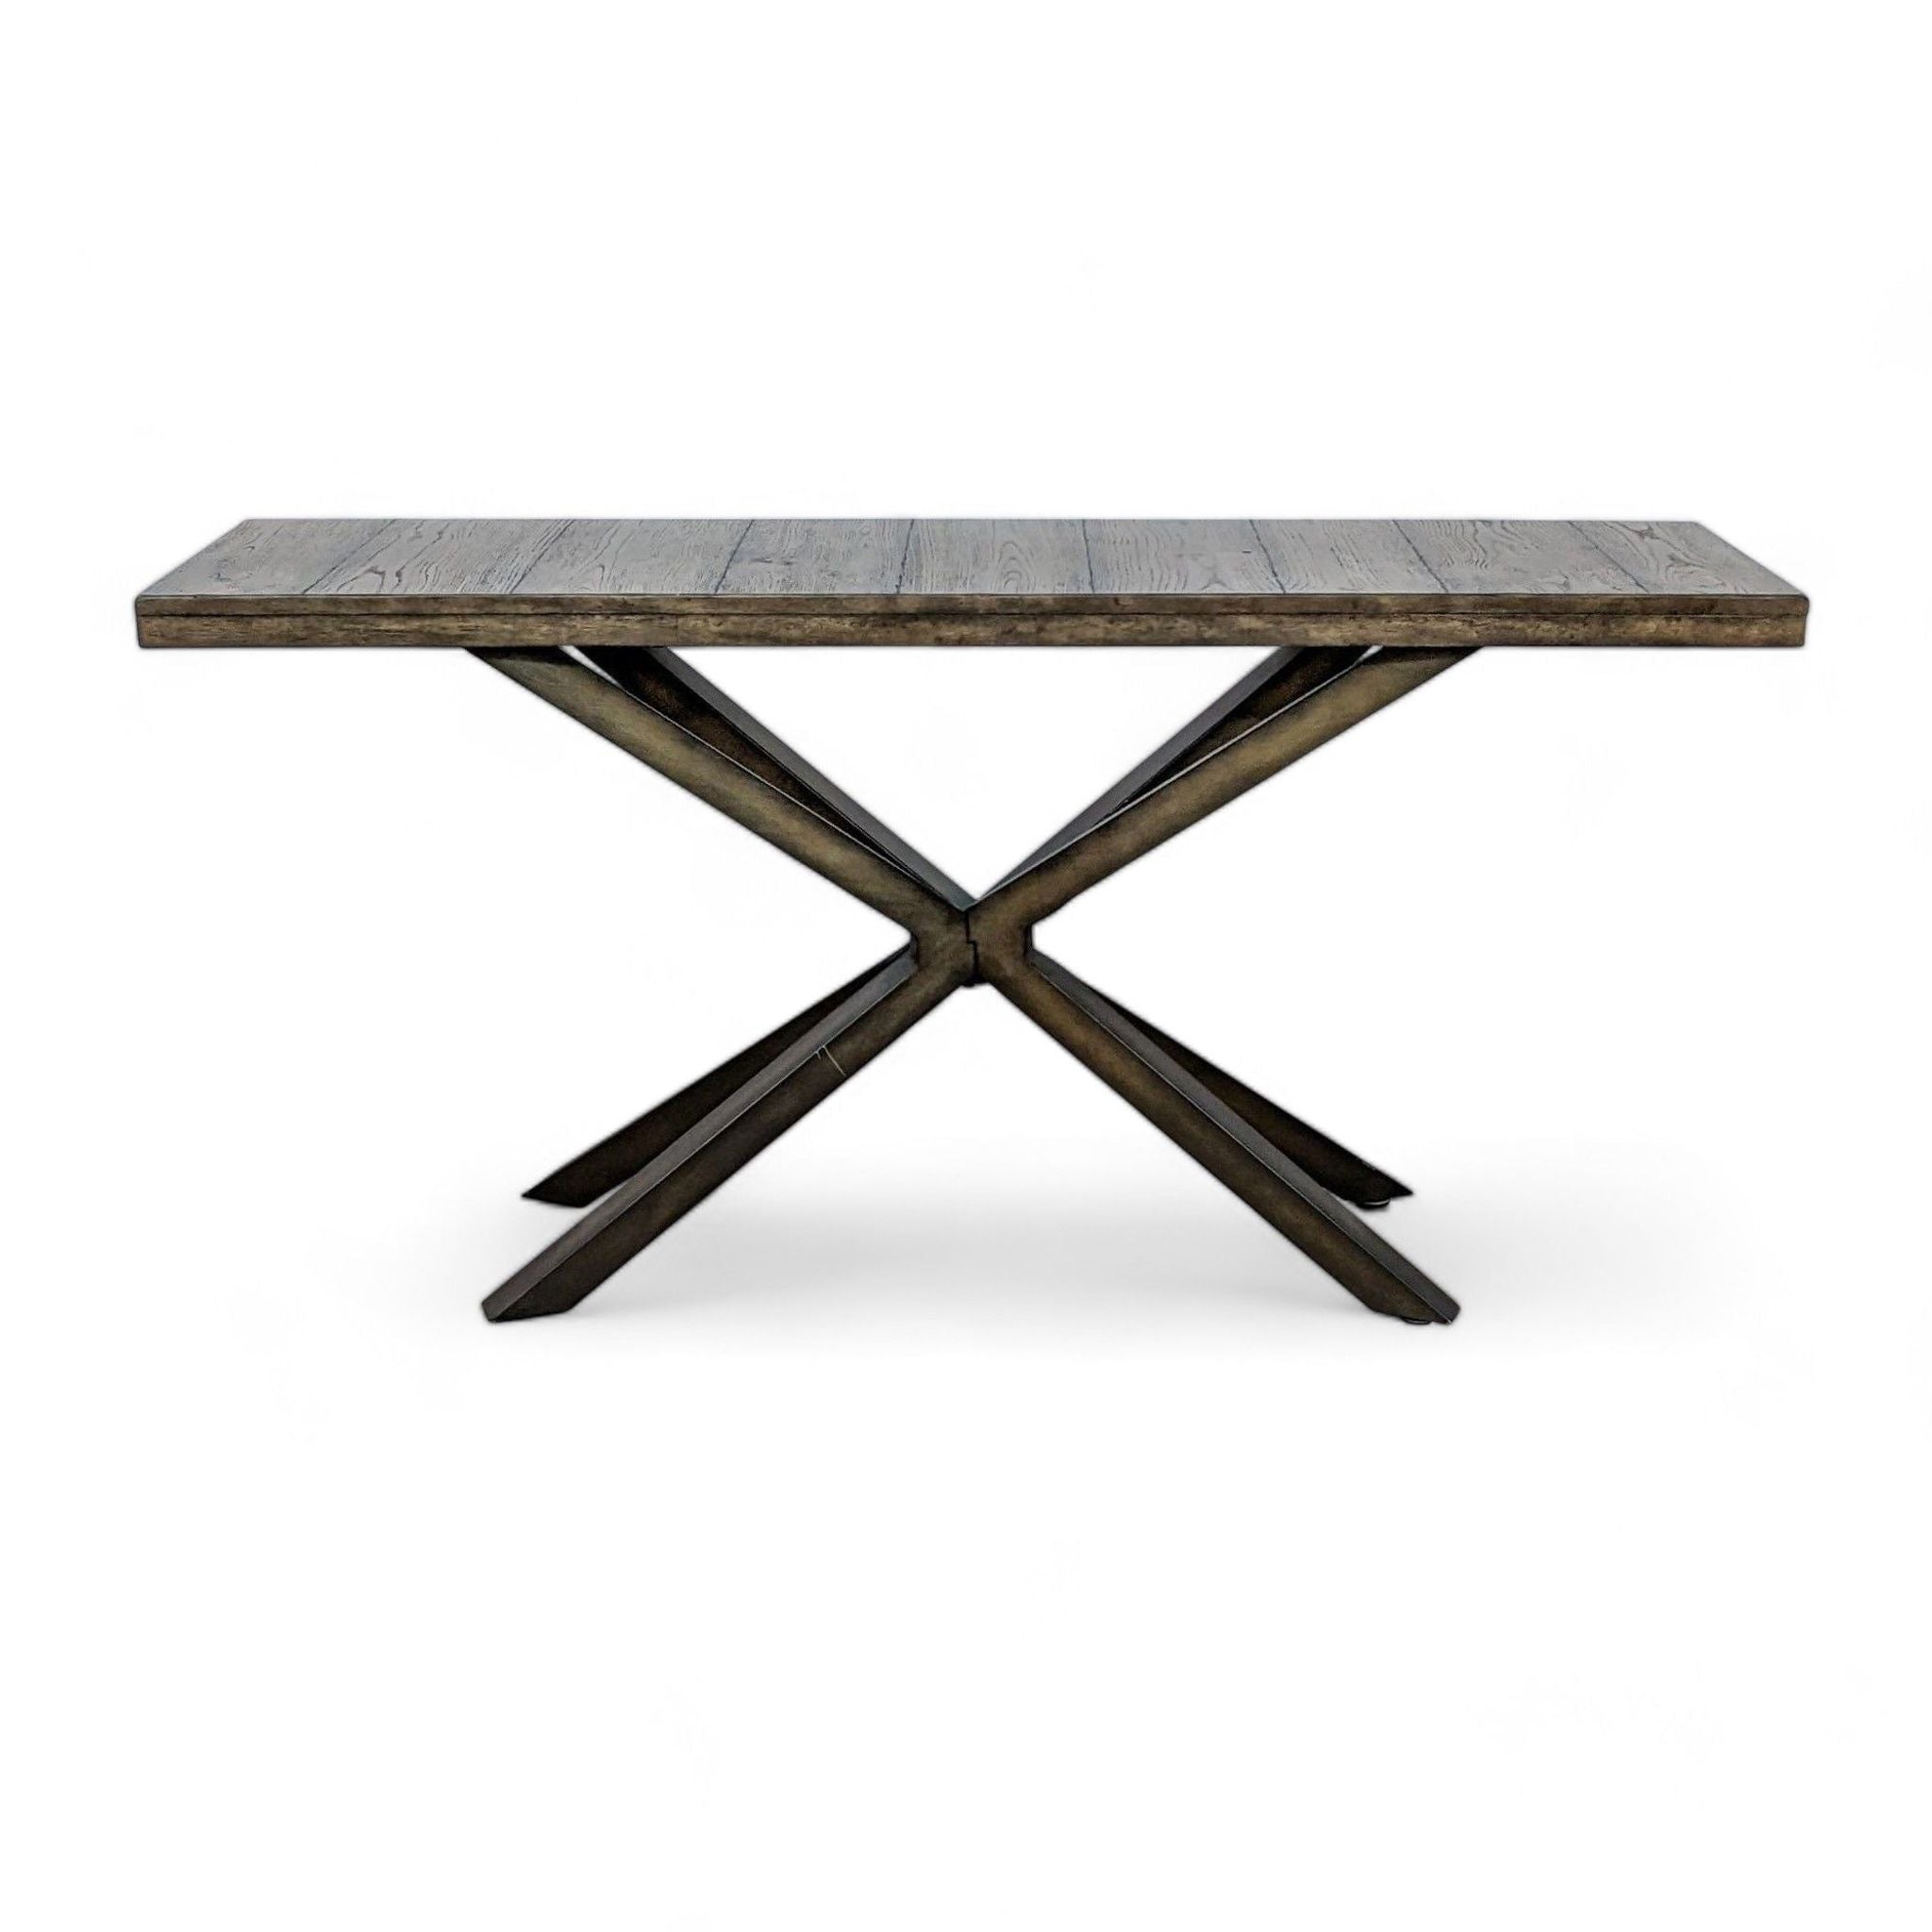 Reclaimed wood top console table with double X metal base by Pottery Barn, isoalted on white background.